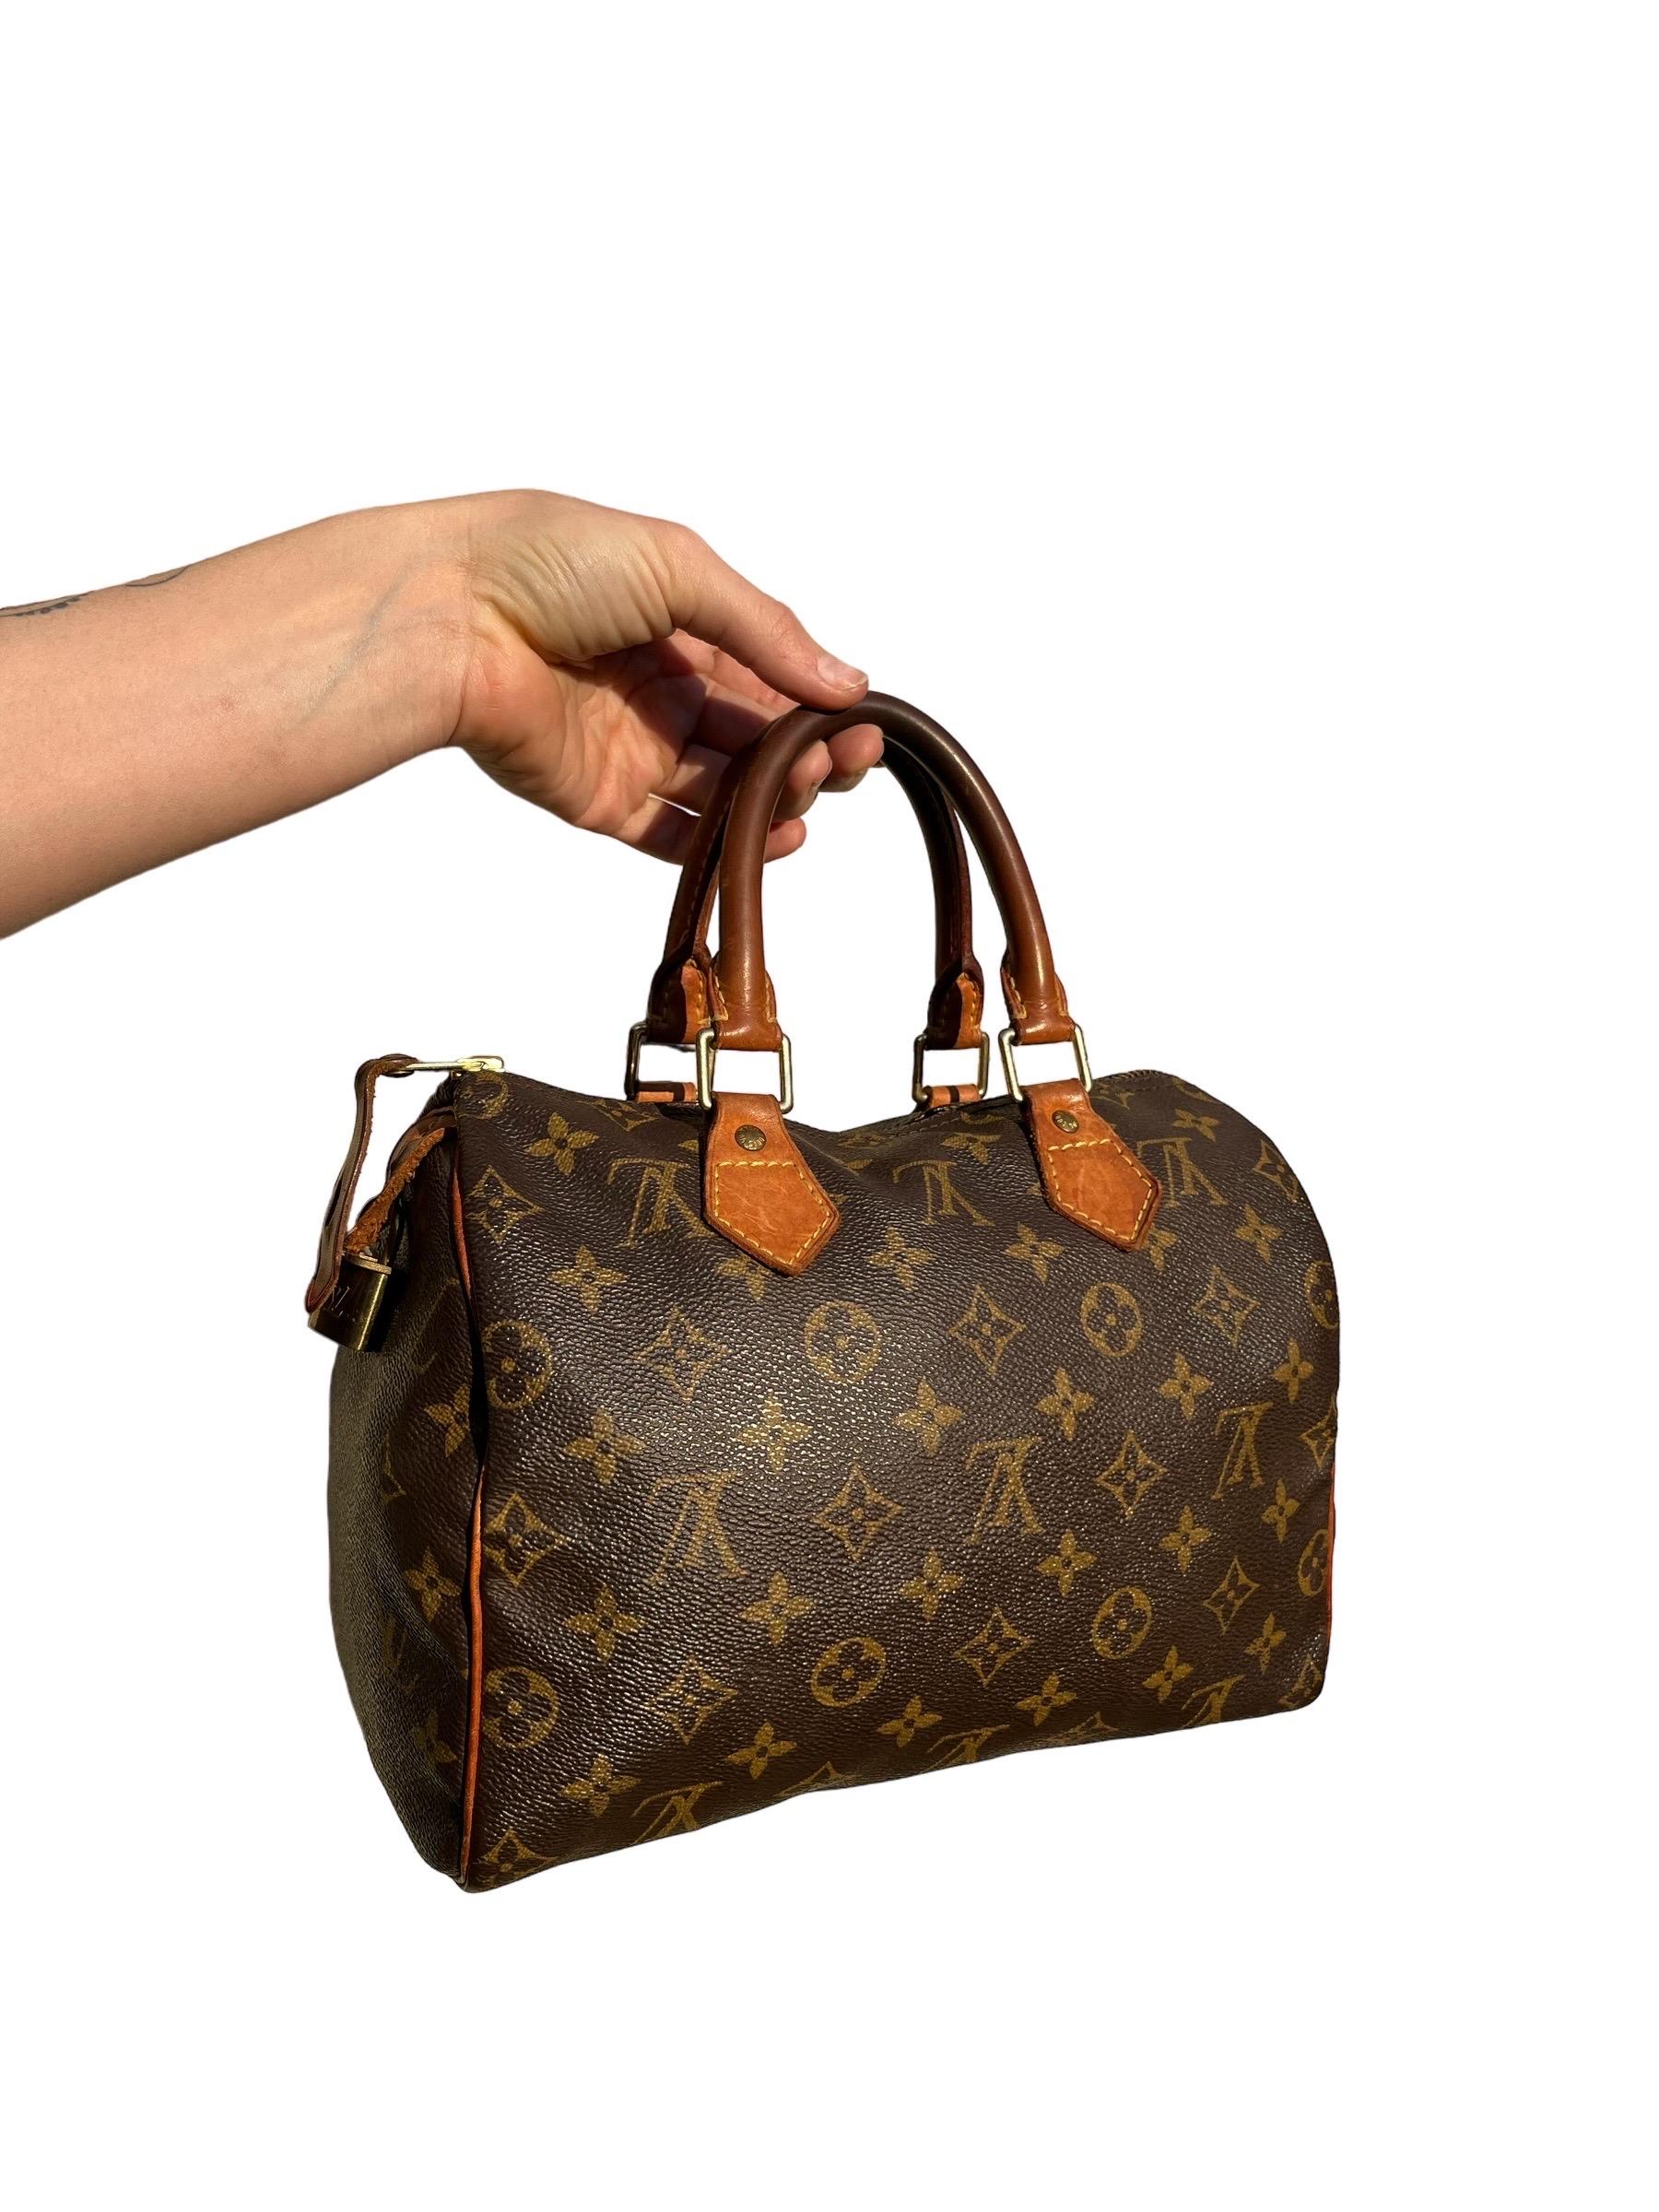 Classic Vintage 1960s Louis Vuitton Speedy 30 Handbag Monogram Canvas

Authenticated Louis Vuitton canvas bag from the 60's with lock and key. Leather handles, monogram printed canvas body, metal hardware. 
Excellent condition! See photos & videos